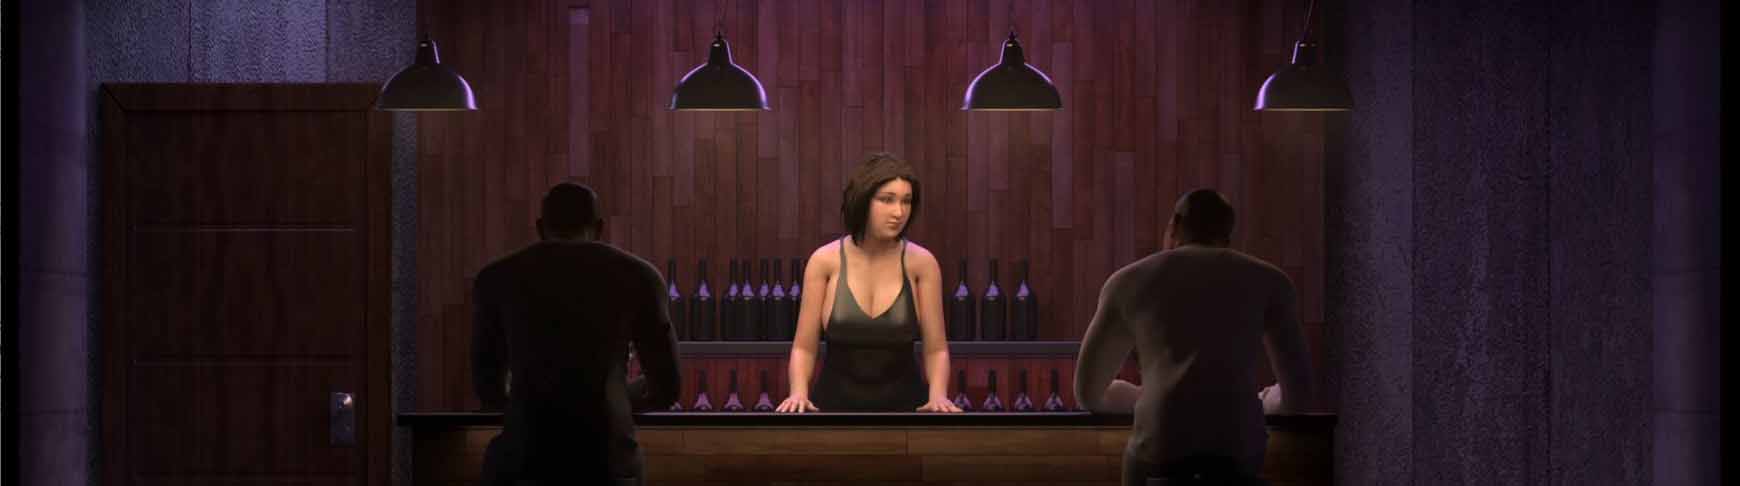 Club 53 Apk Android Download (11)